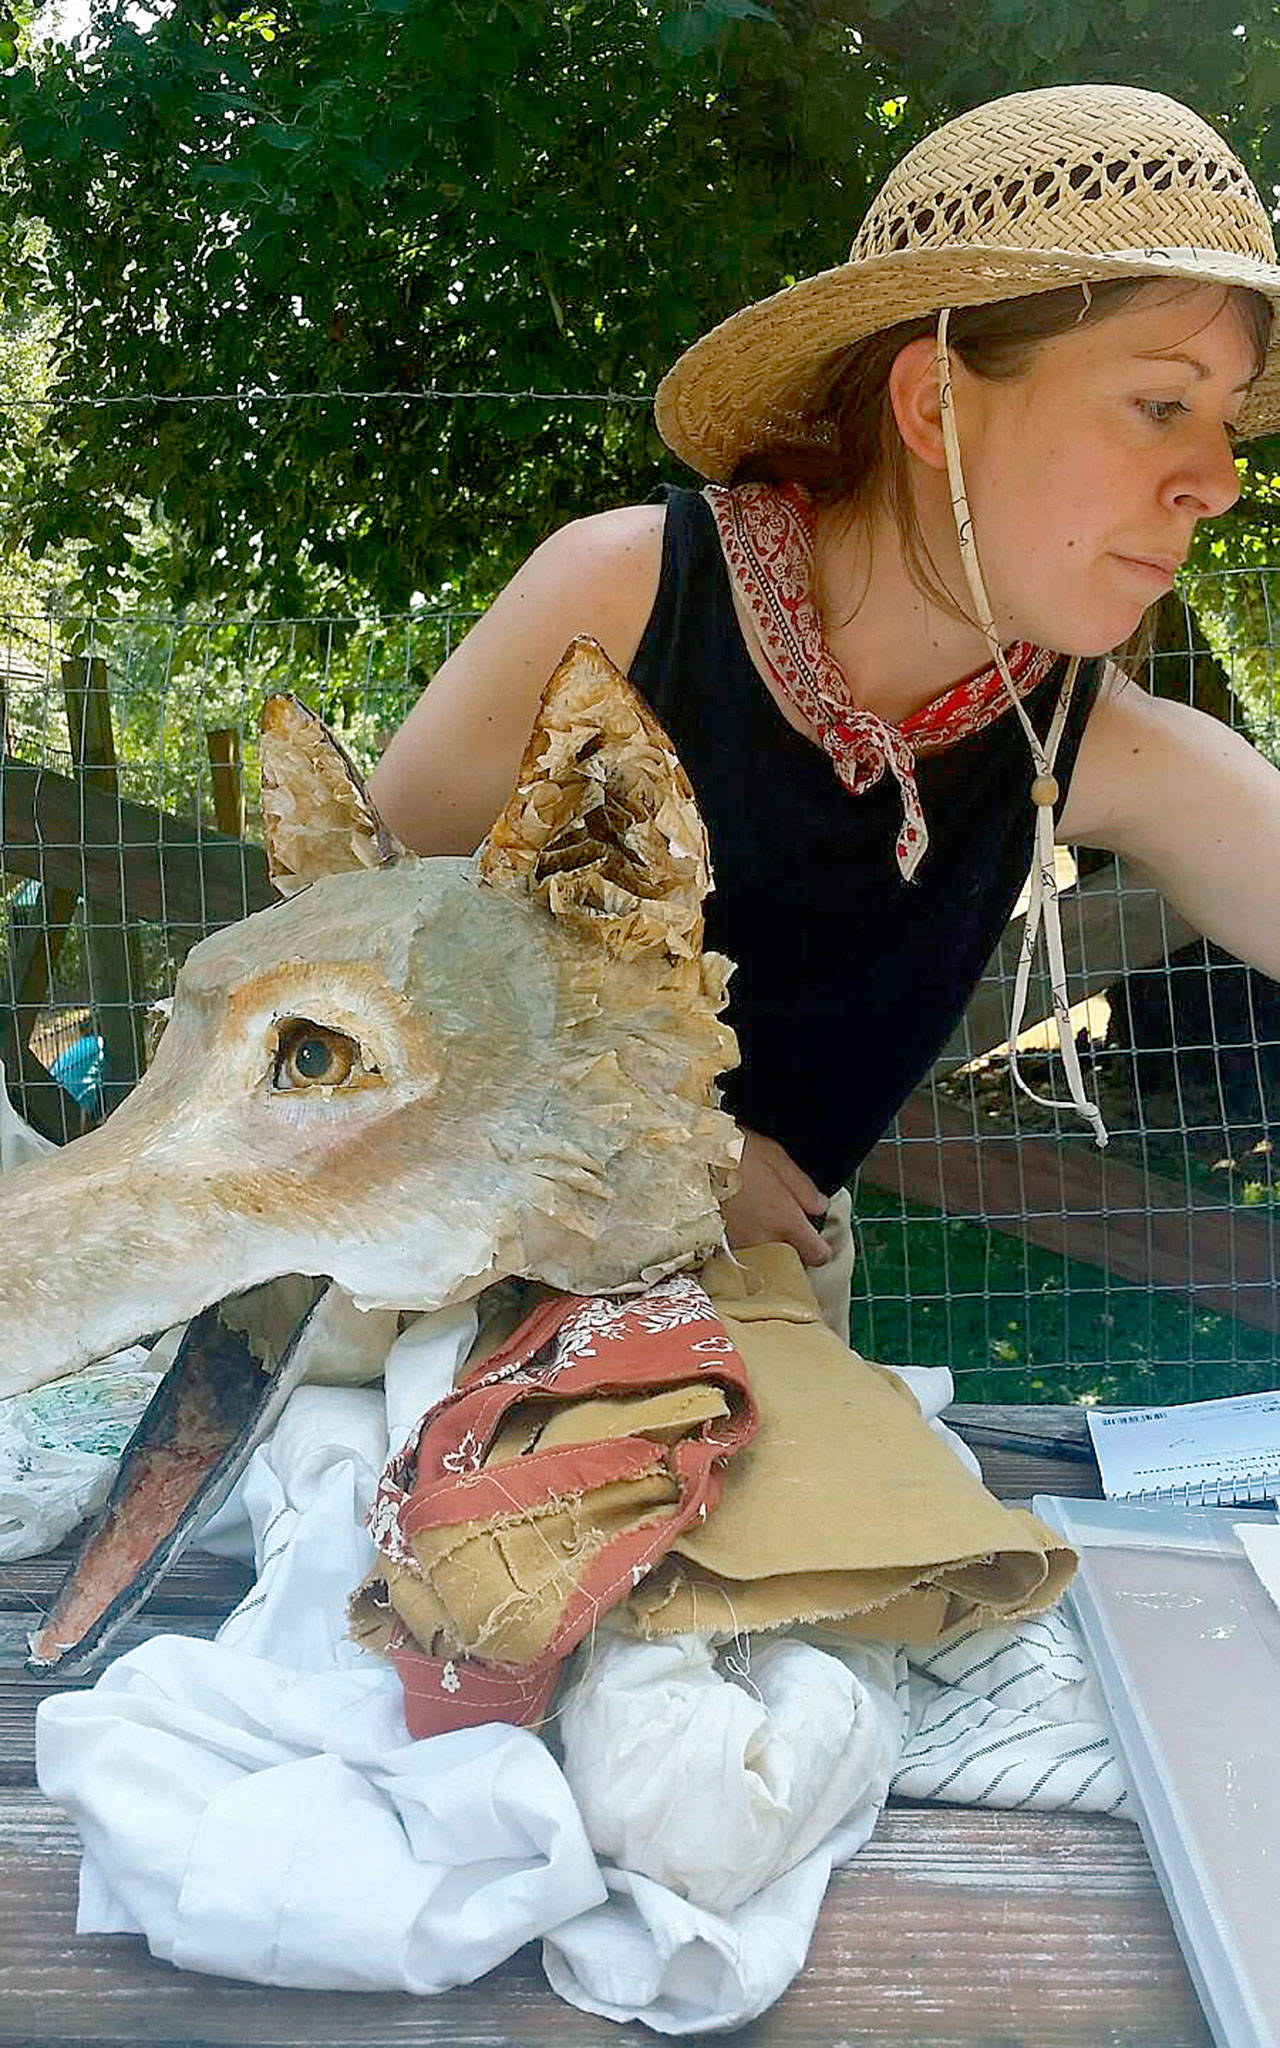 Michelle Lassaline, Mary Olson Farm’s artist in residence, and Coyote, one of 11 paper-maché masks she has made and dons when she paints for the public, enjoy a cool moment in the welcome shade of an apple tree on her final day at the rebuilt farm last Sunday. ROBERT WHALE, Auburn Reporter